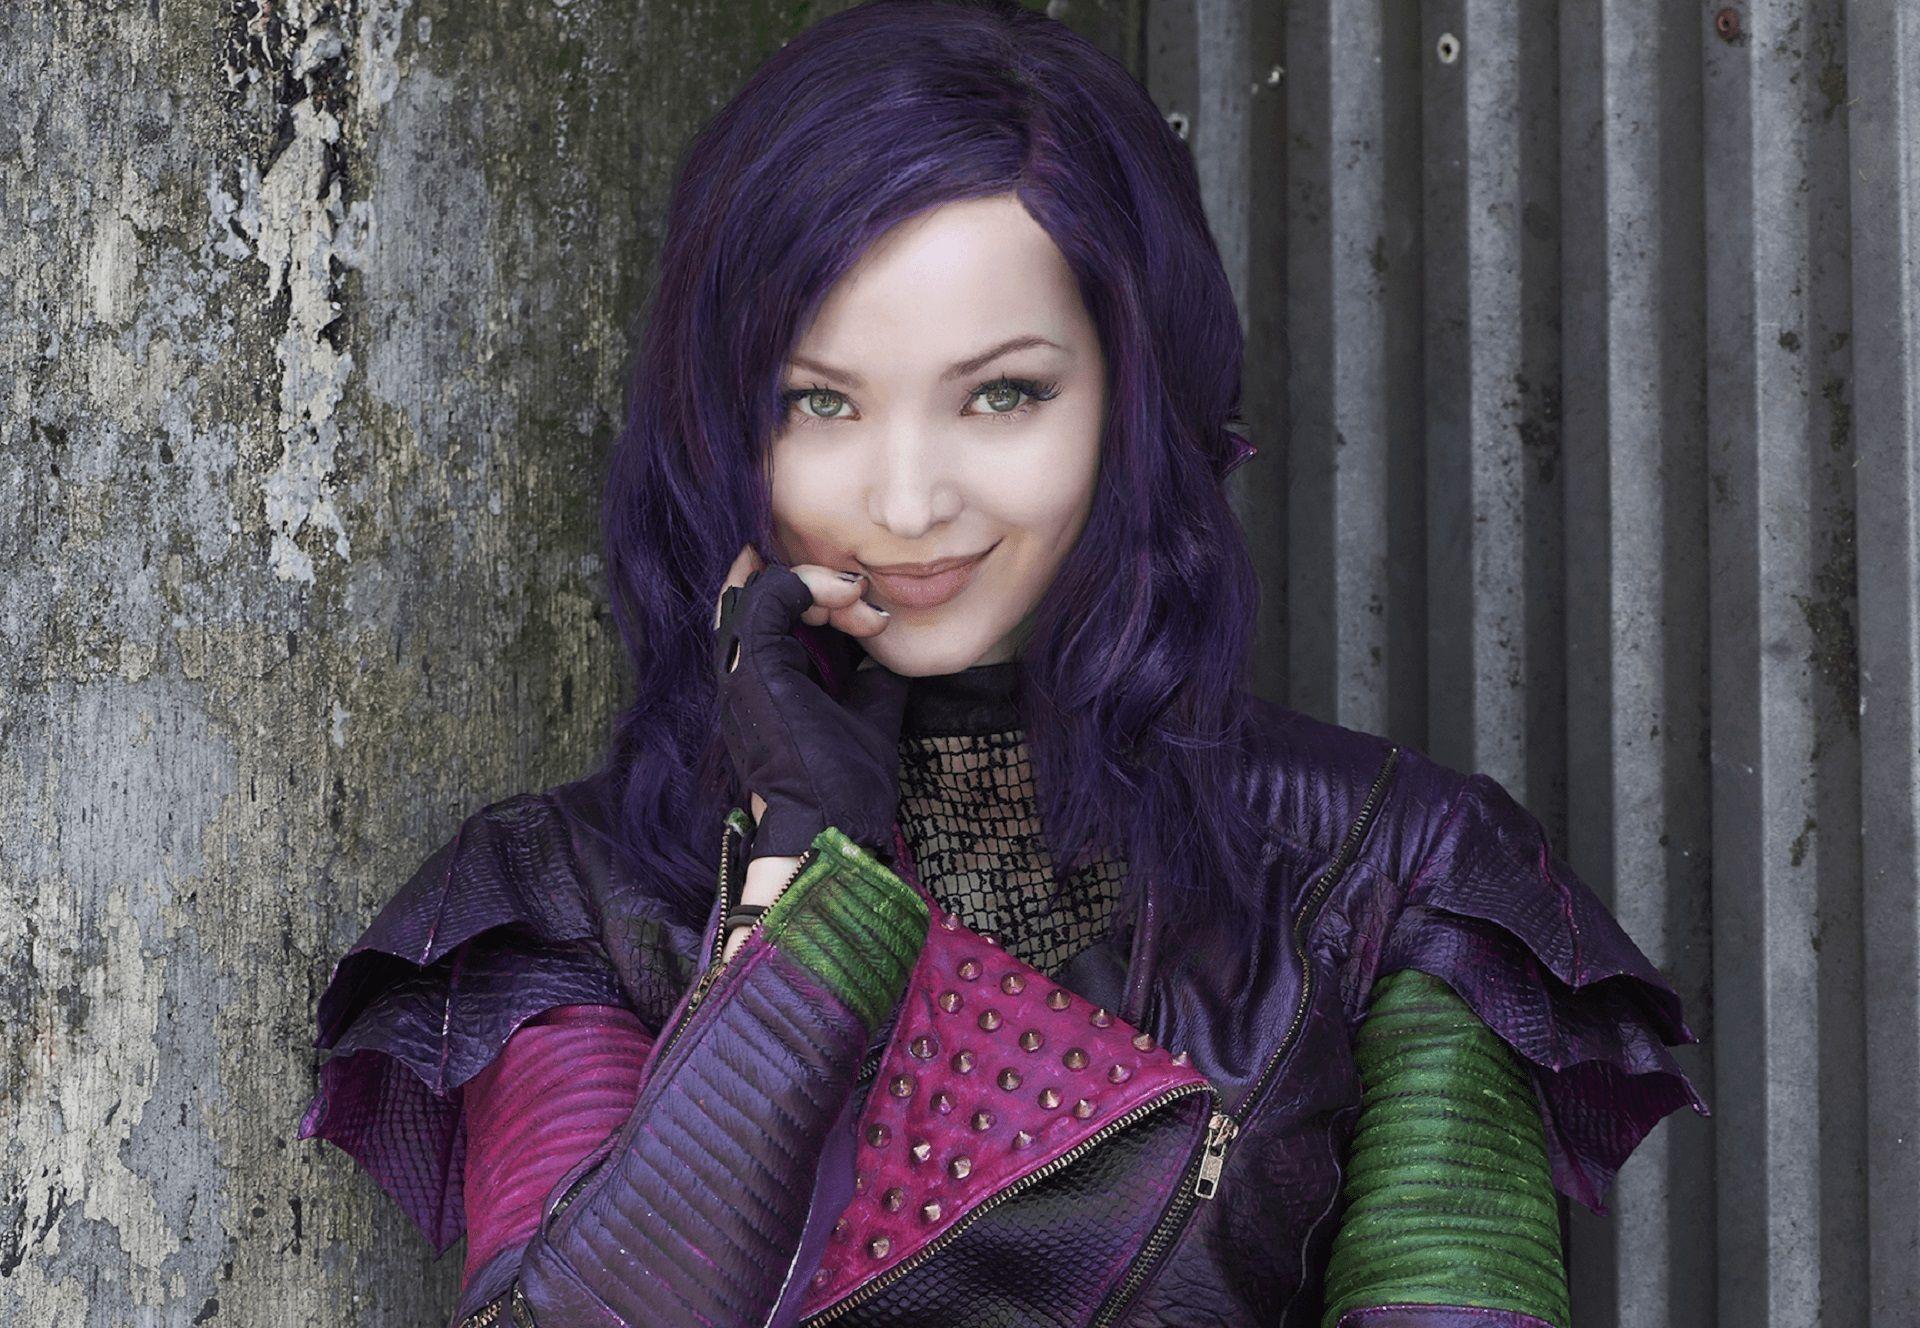 Descendants 2 image Mal HD wallpapers and backgrounds photos.